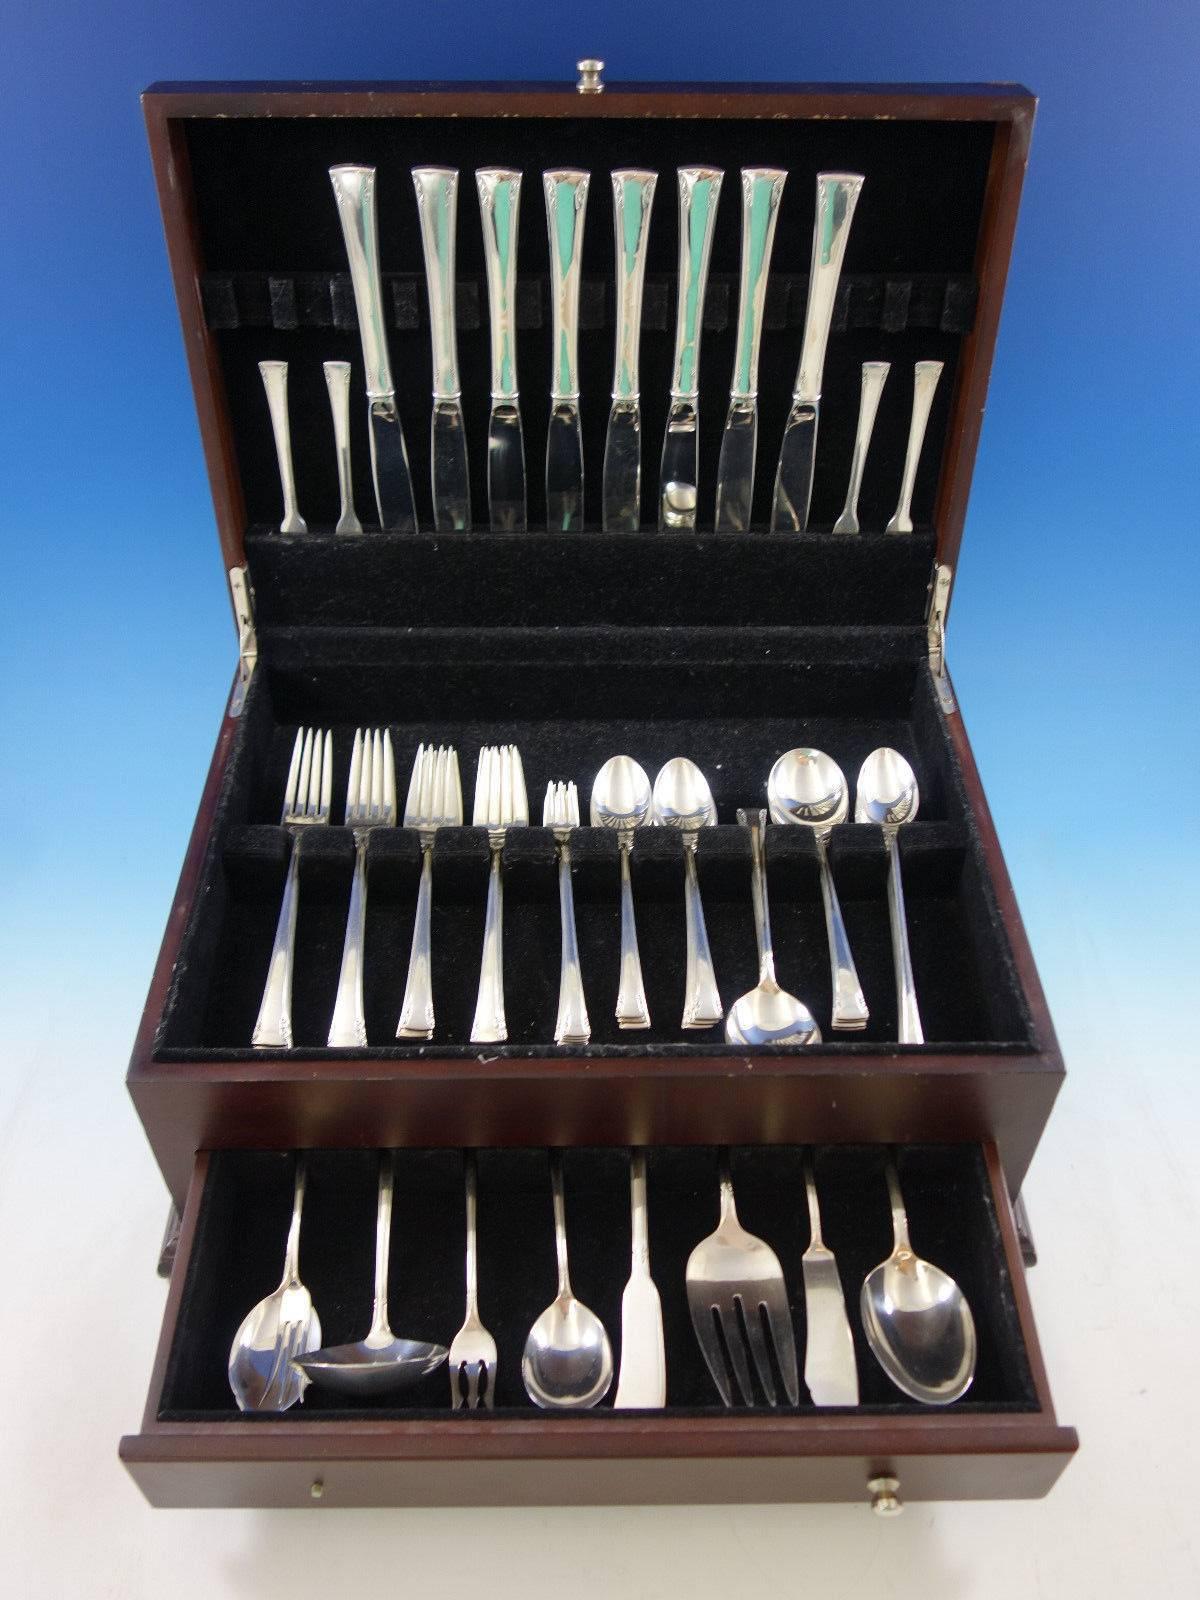 Serenity by International sterling silver flatware set, 72 pieces. This set includes: 

Eight knives, 9 1/4